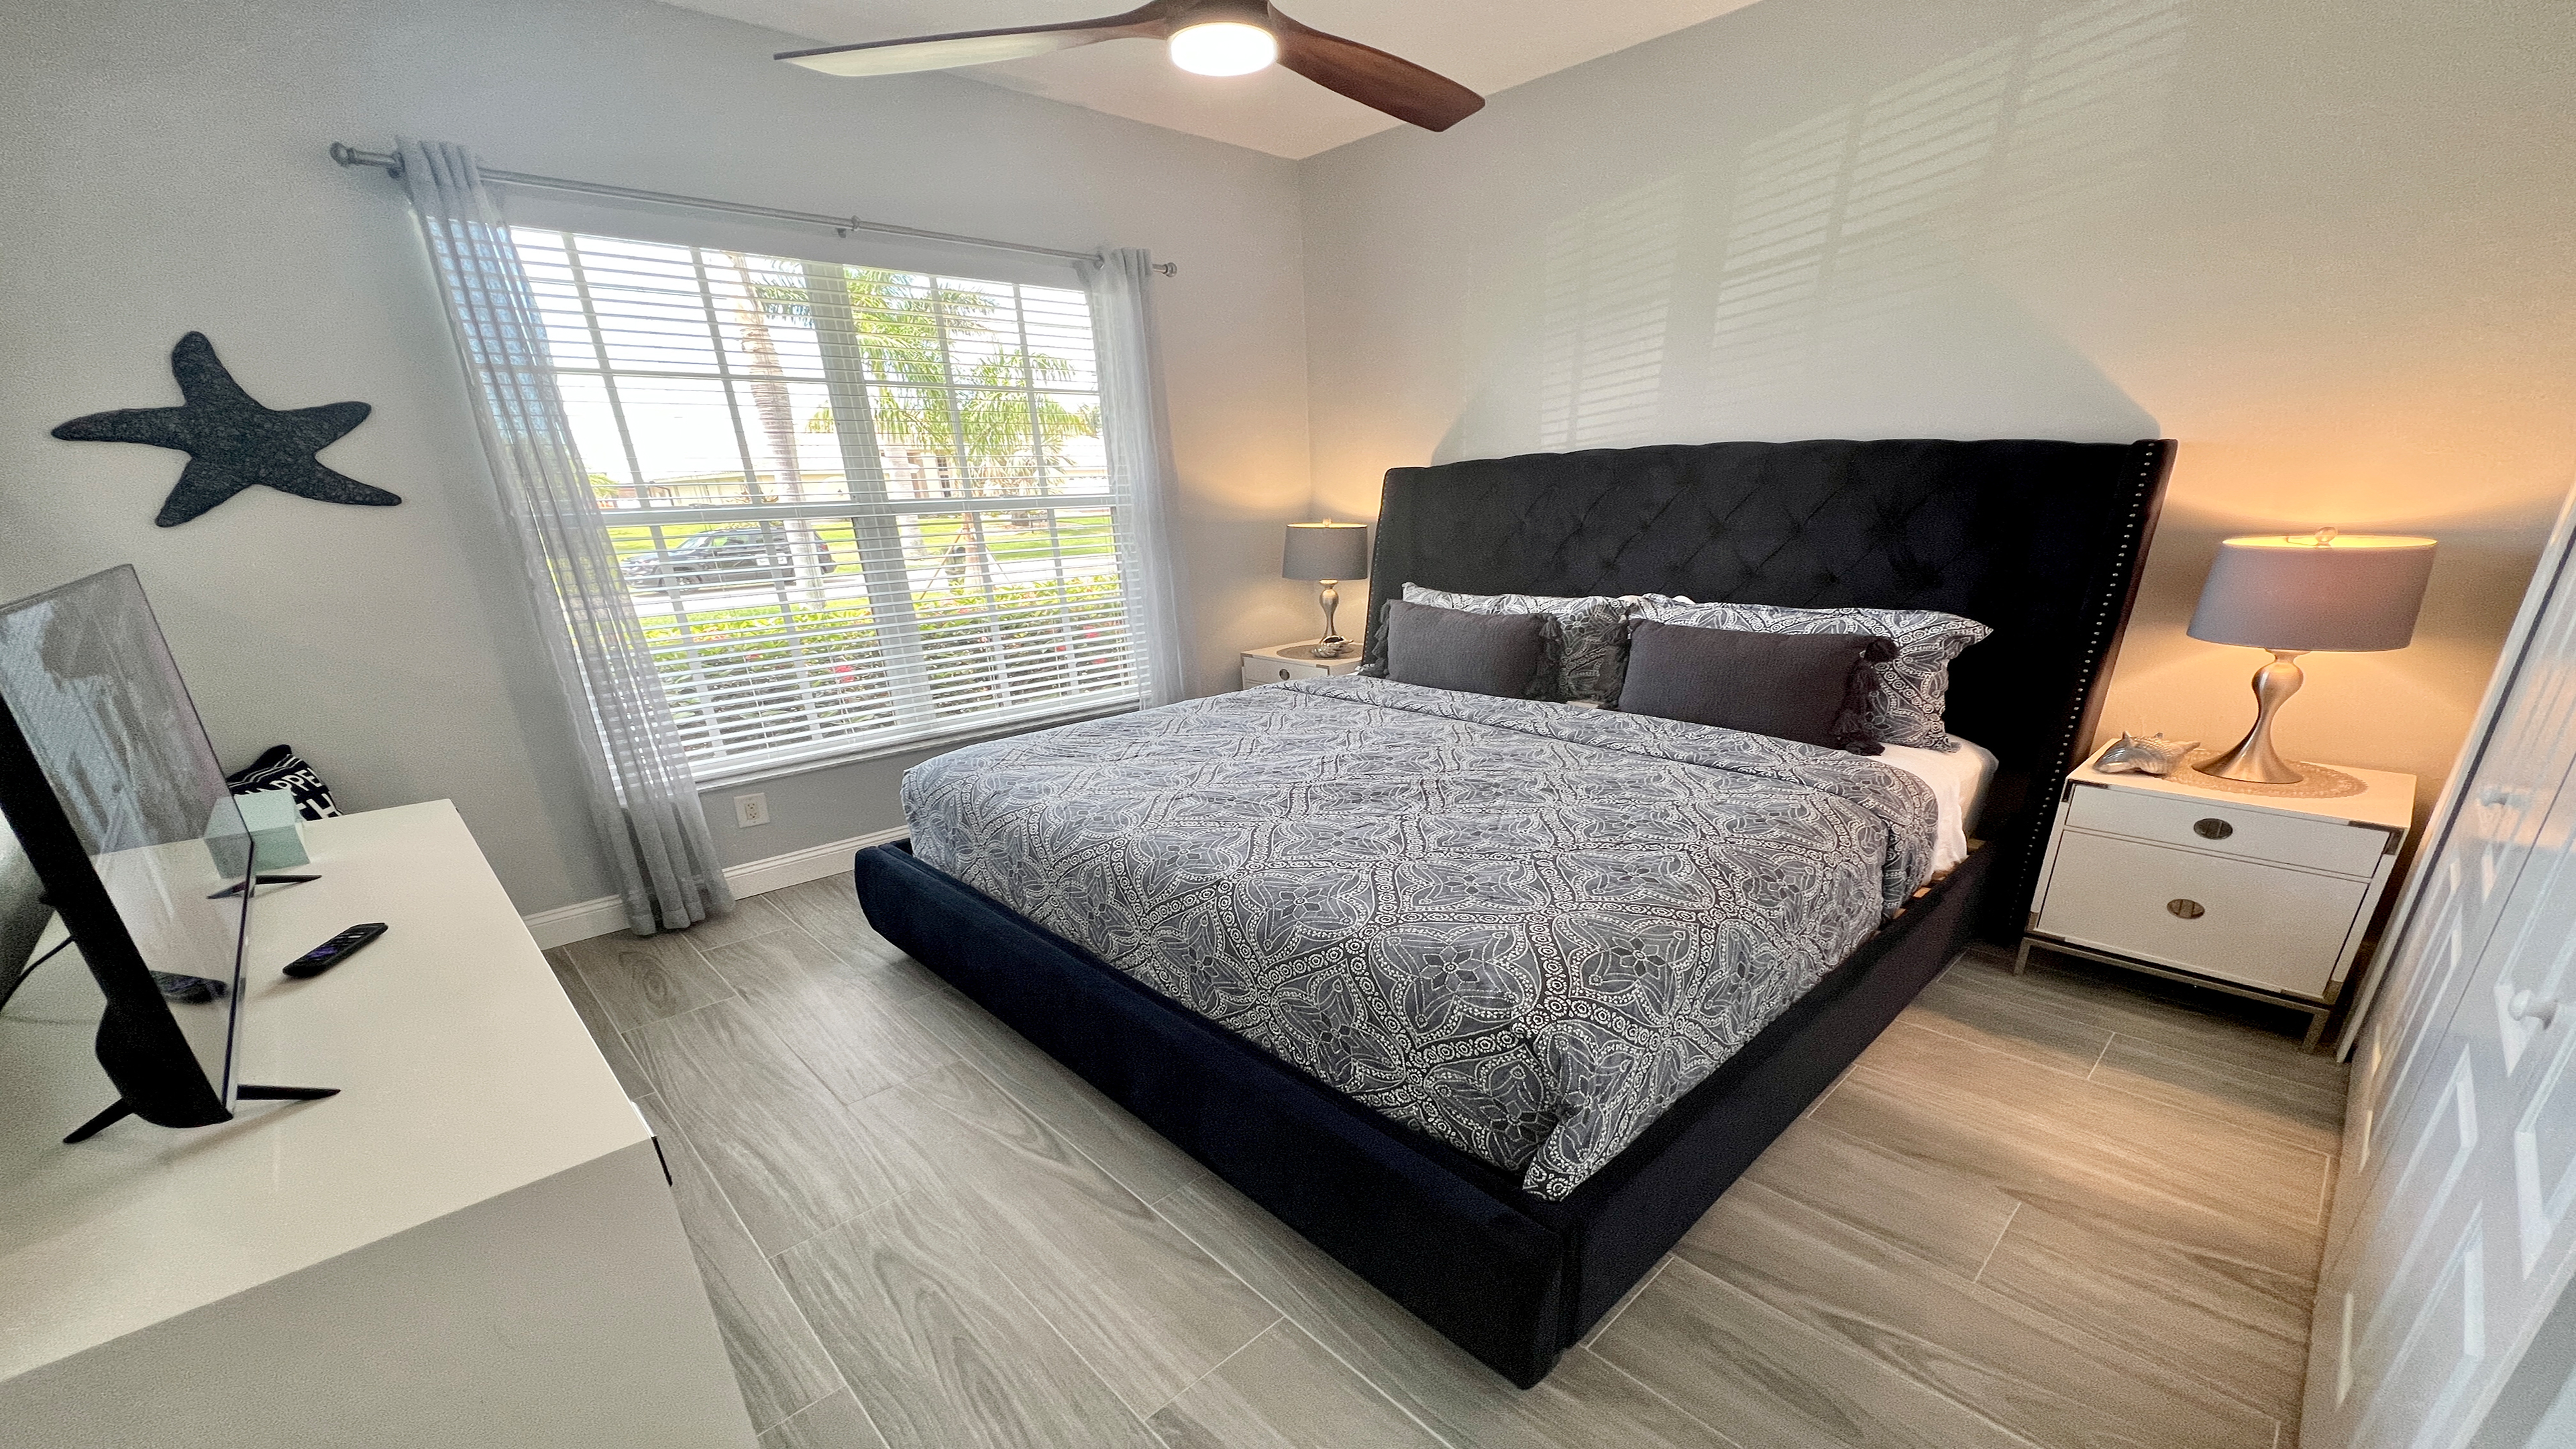 The front bedroom features another Queen size bed